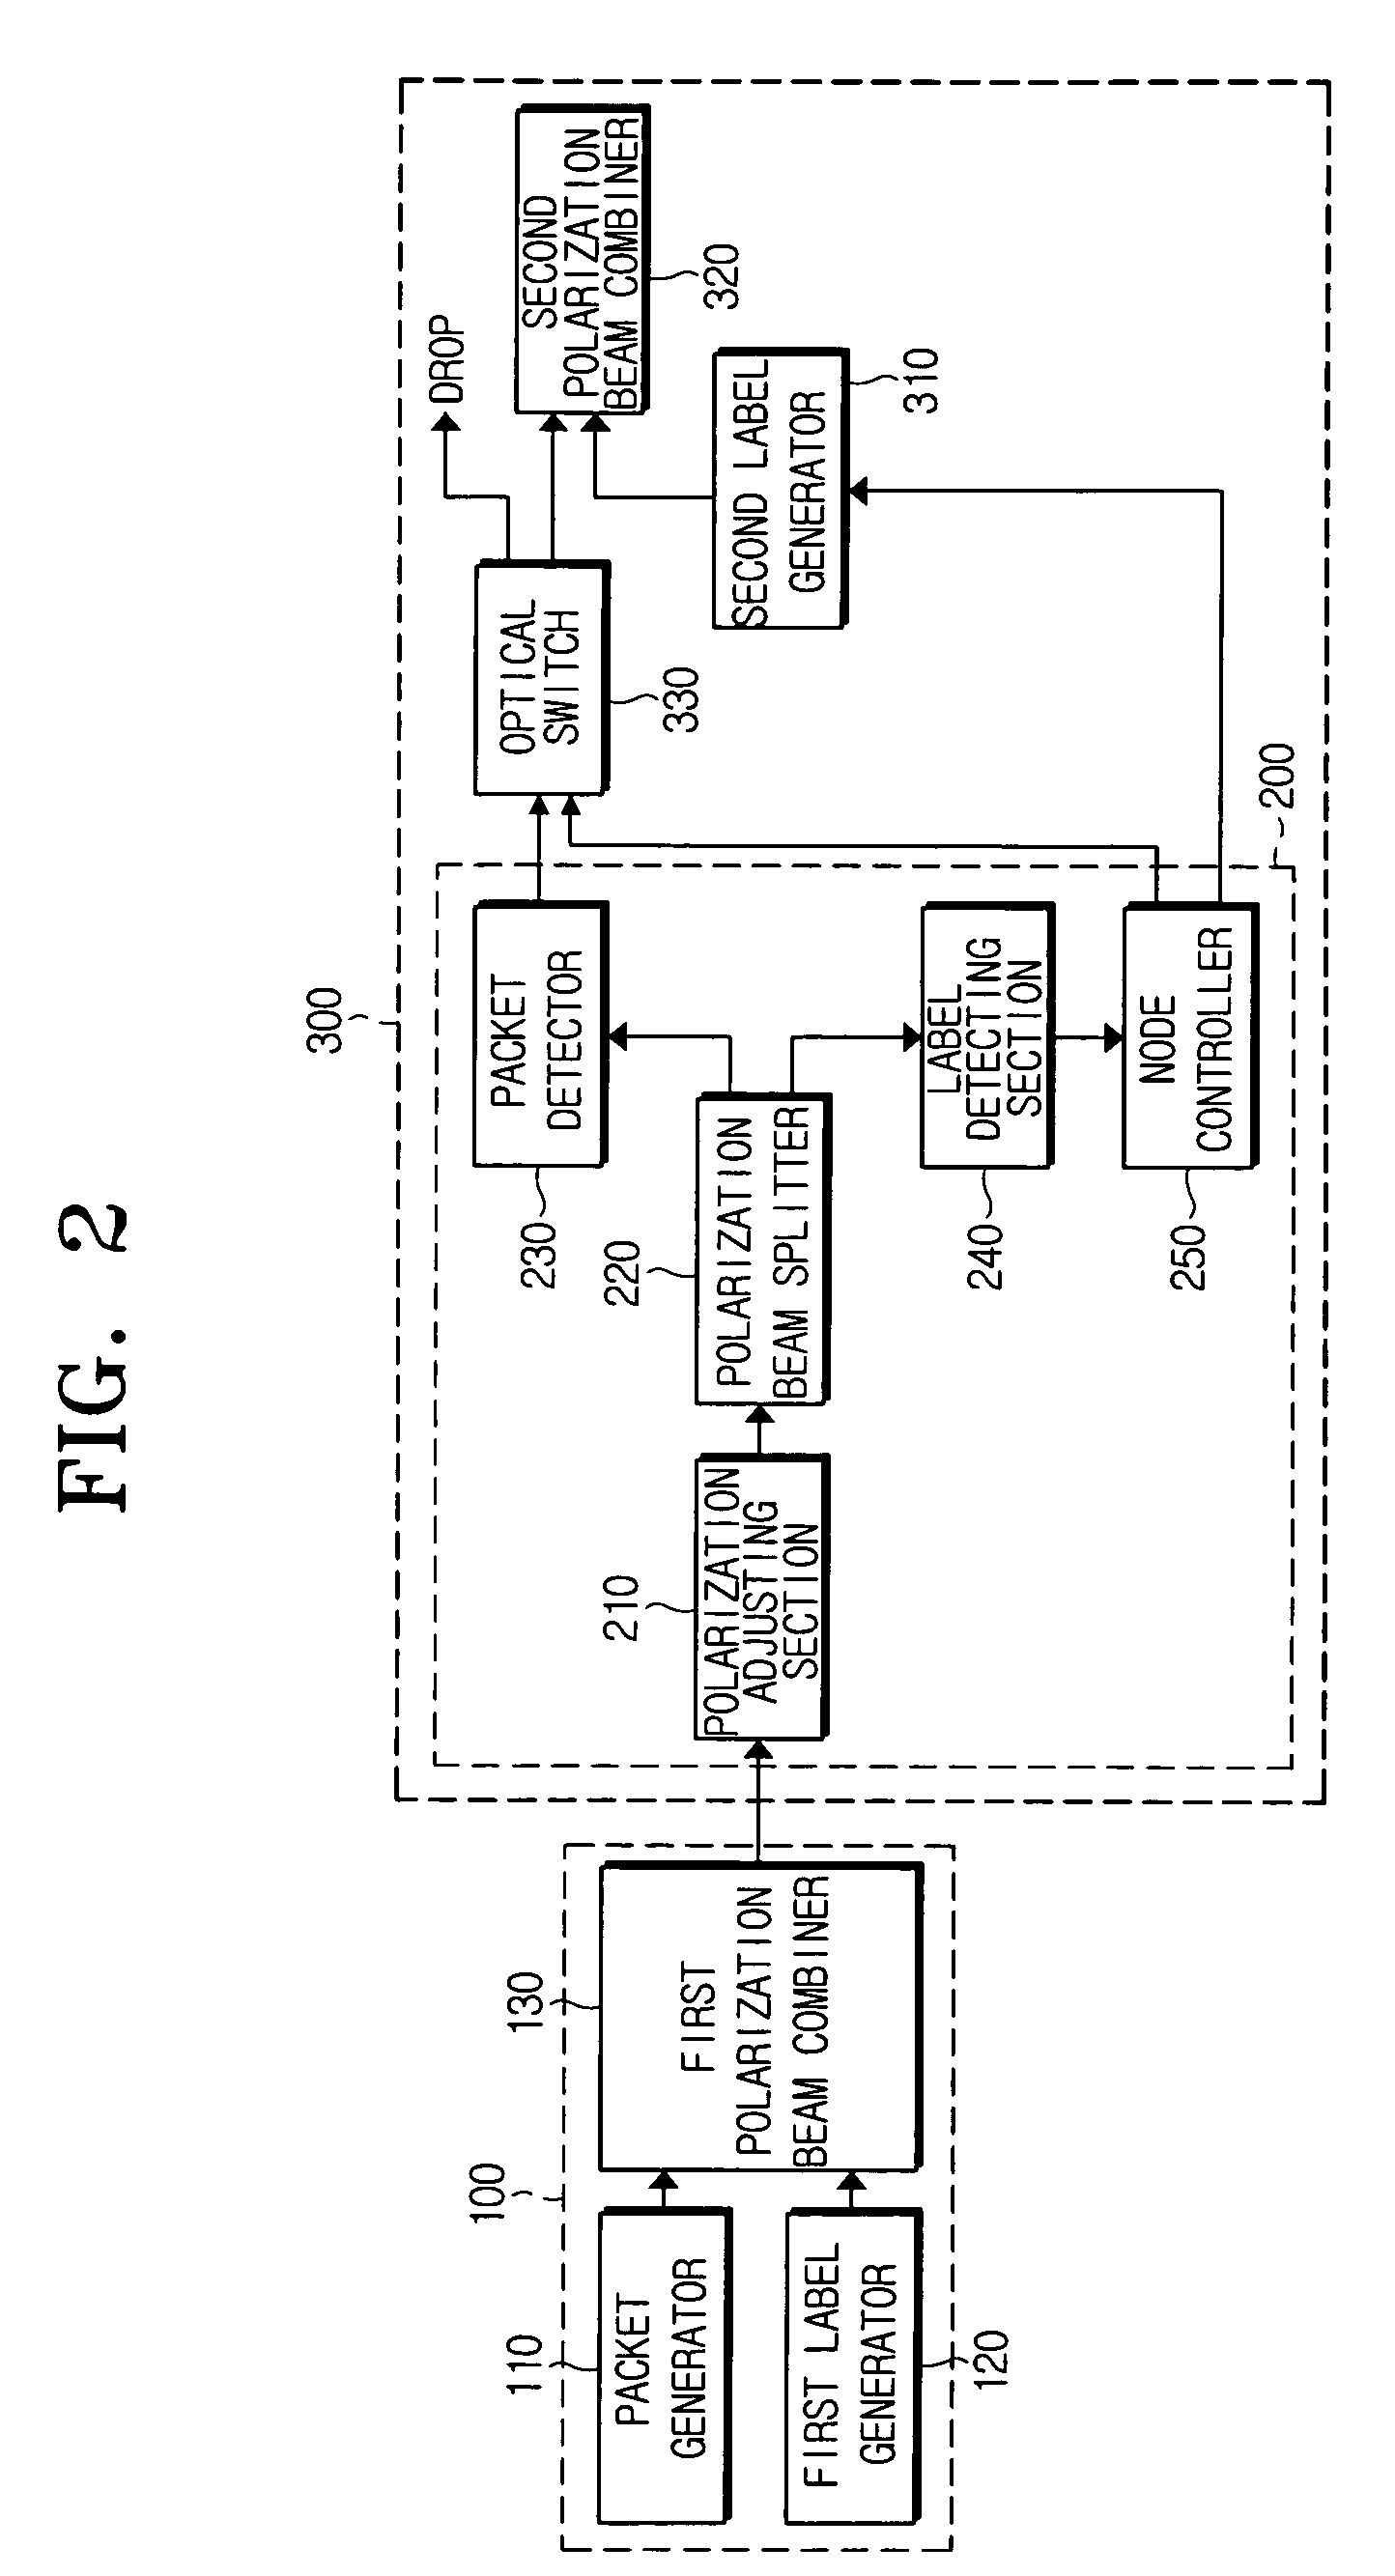 Optical packet communication system using labeling of wavelength-offset polarization-division multiplexing